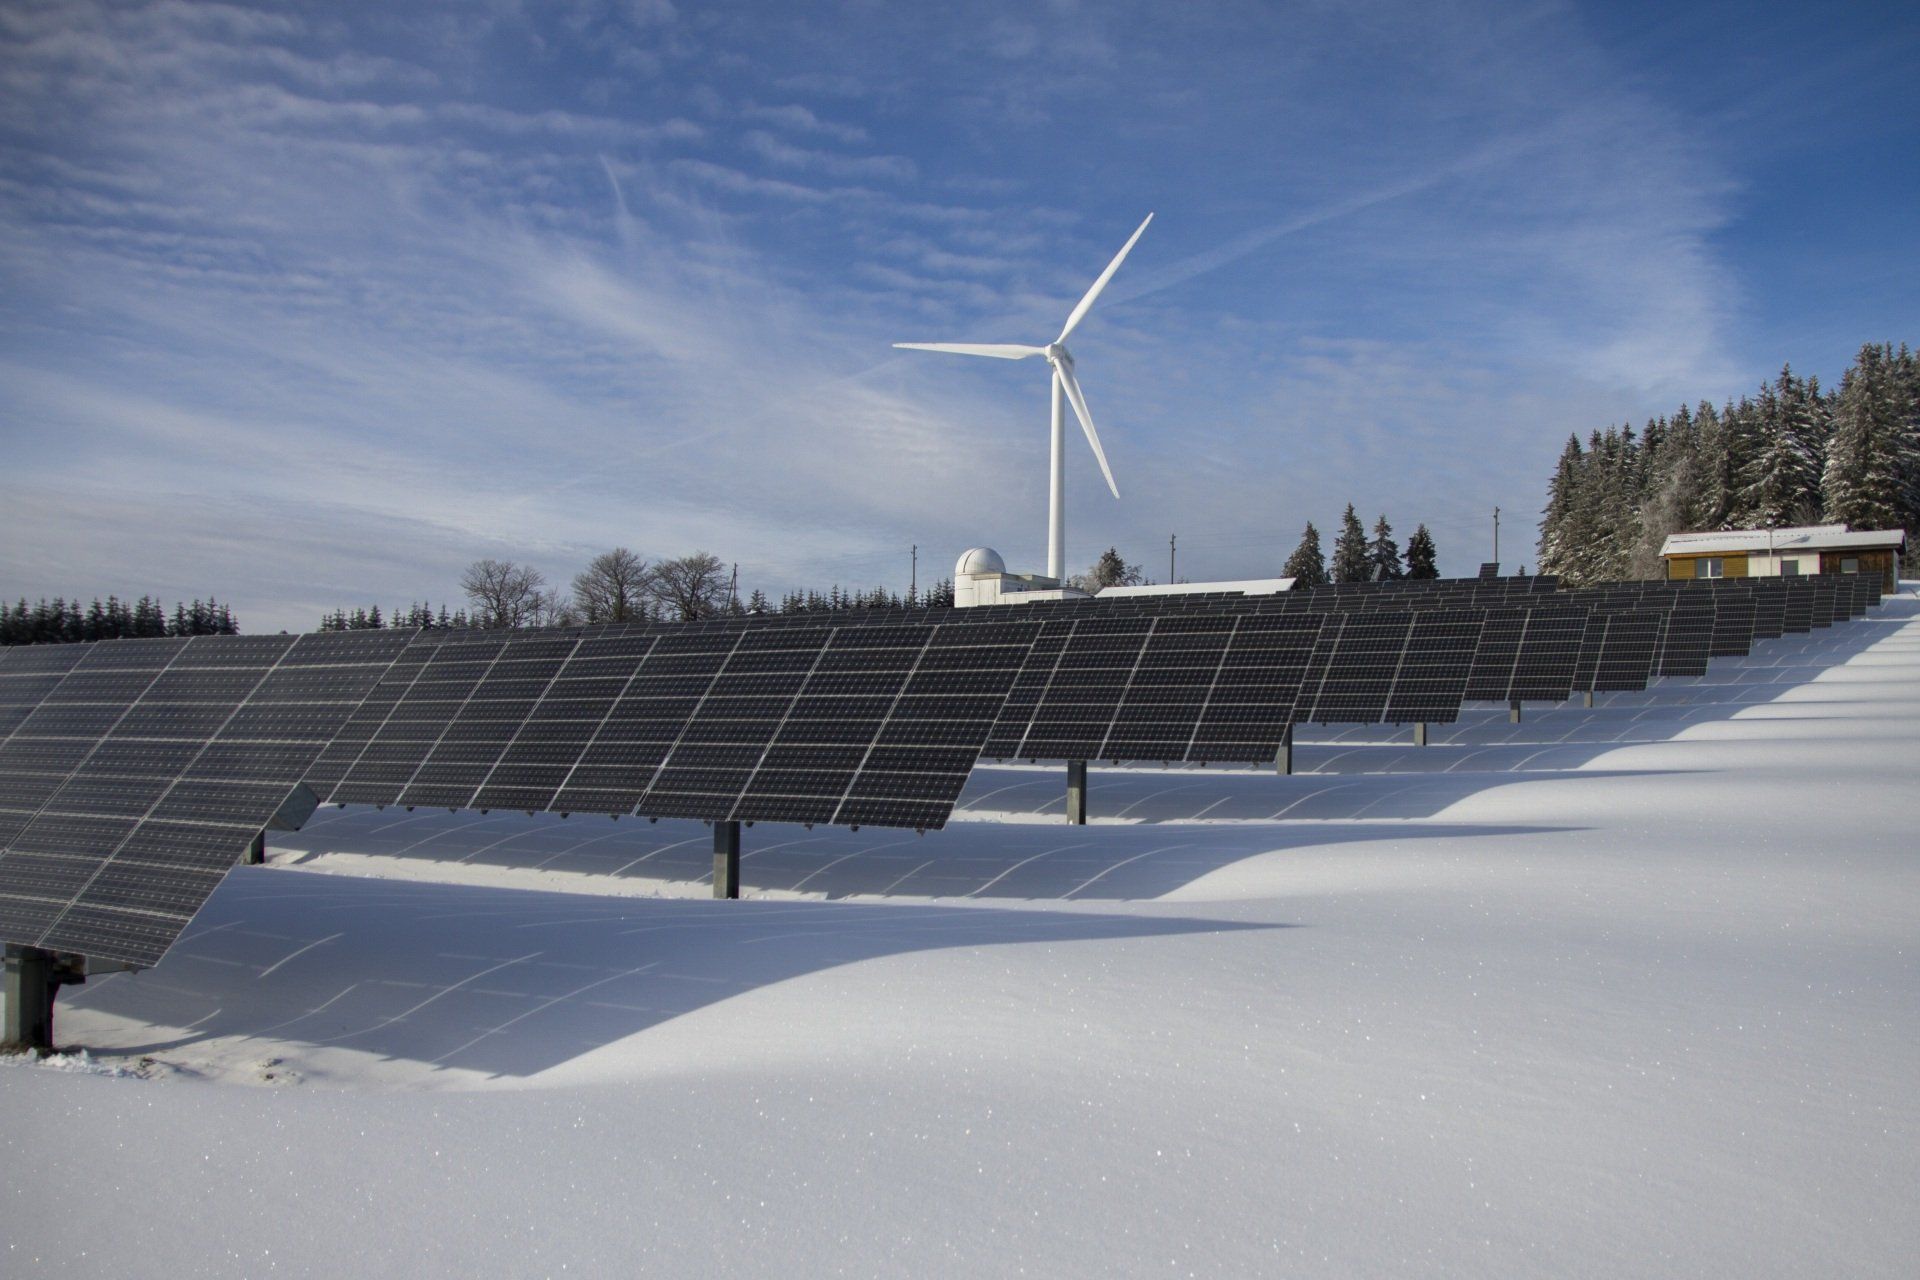 a row of solar panels in the snow with a wind turbine in the background .